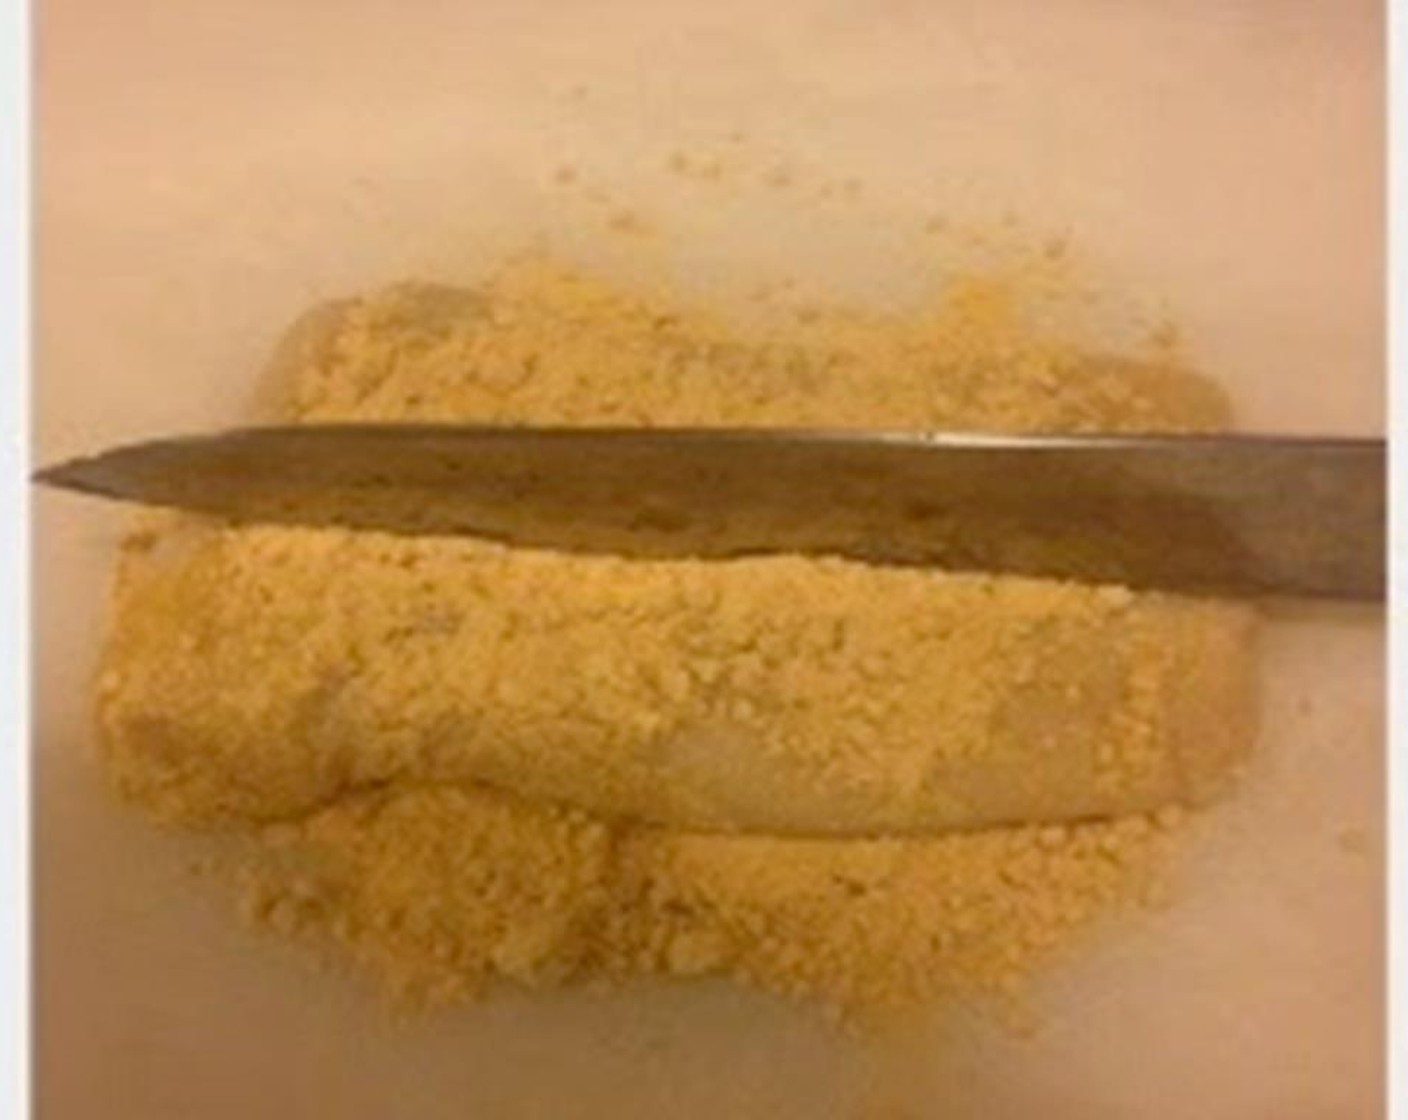 step 4 Put half of the Soy Flour (1 cup) on parchment paper. Take the cooled-down mochi out and coat it with soybean powder. Use a knife to cut mochi into cubes and put more soybean powder on. Coat evenly.